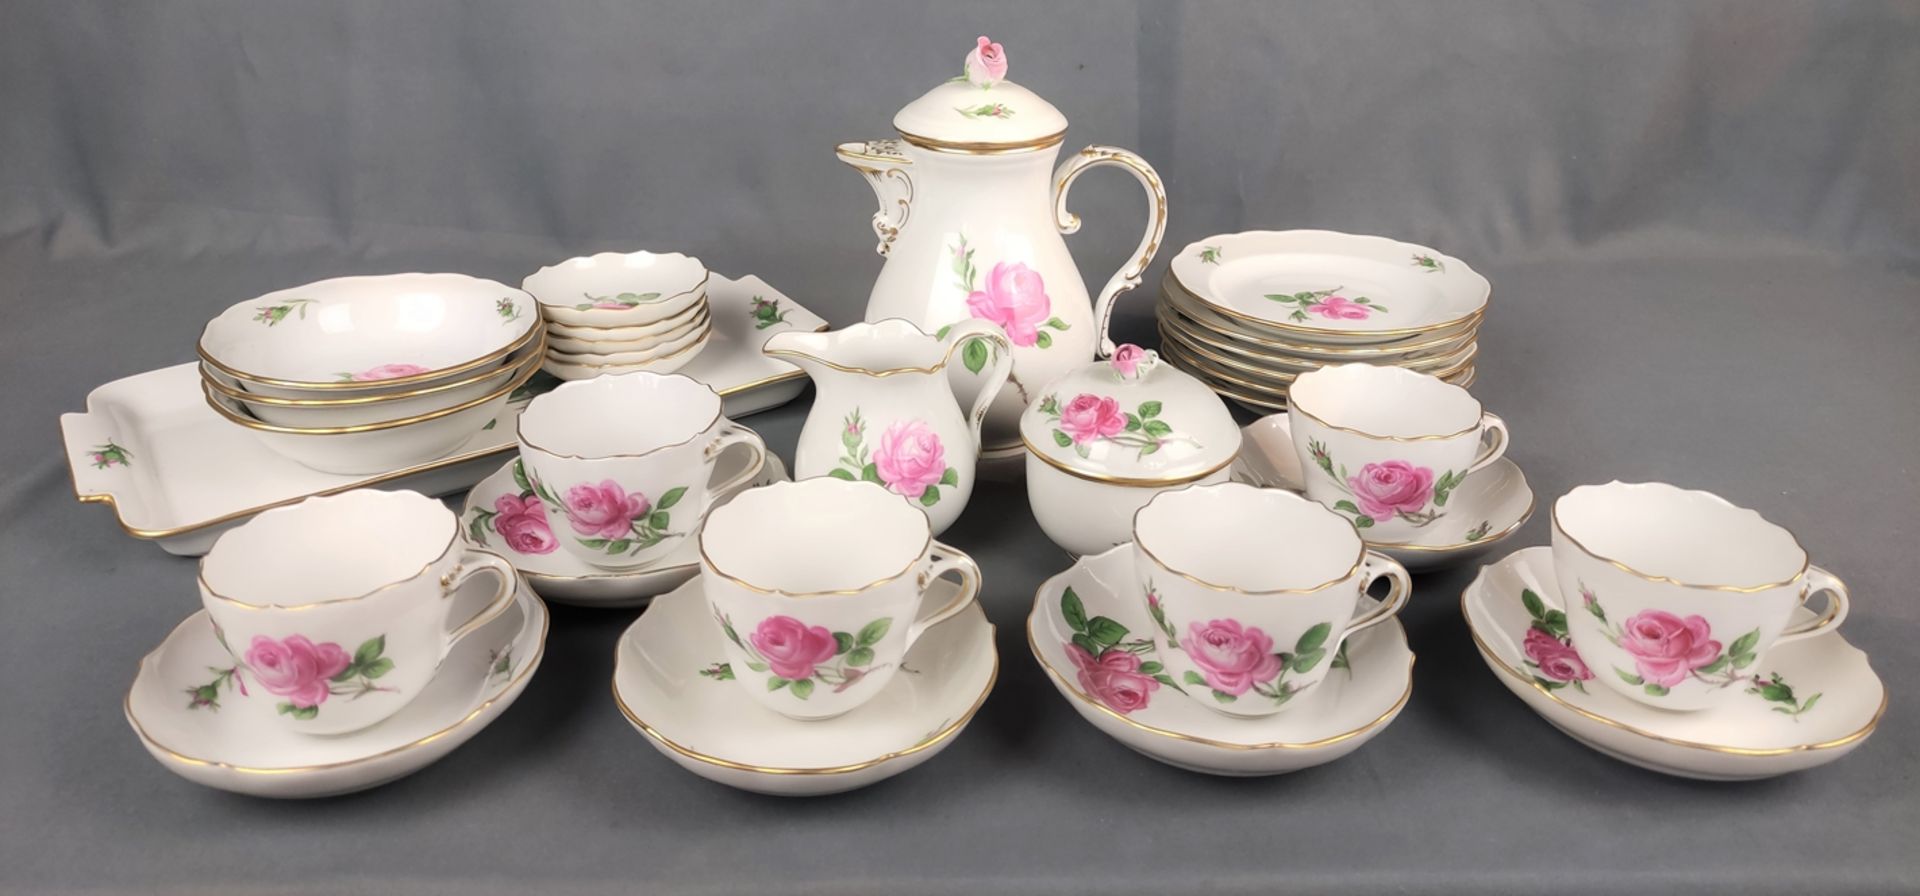 Mocha service for 6 persons, 30 pieces, decor "Red Rose", form New Cutout, sword mark Meissen, 6 cu